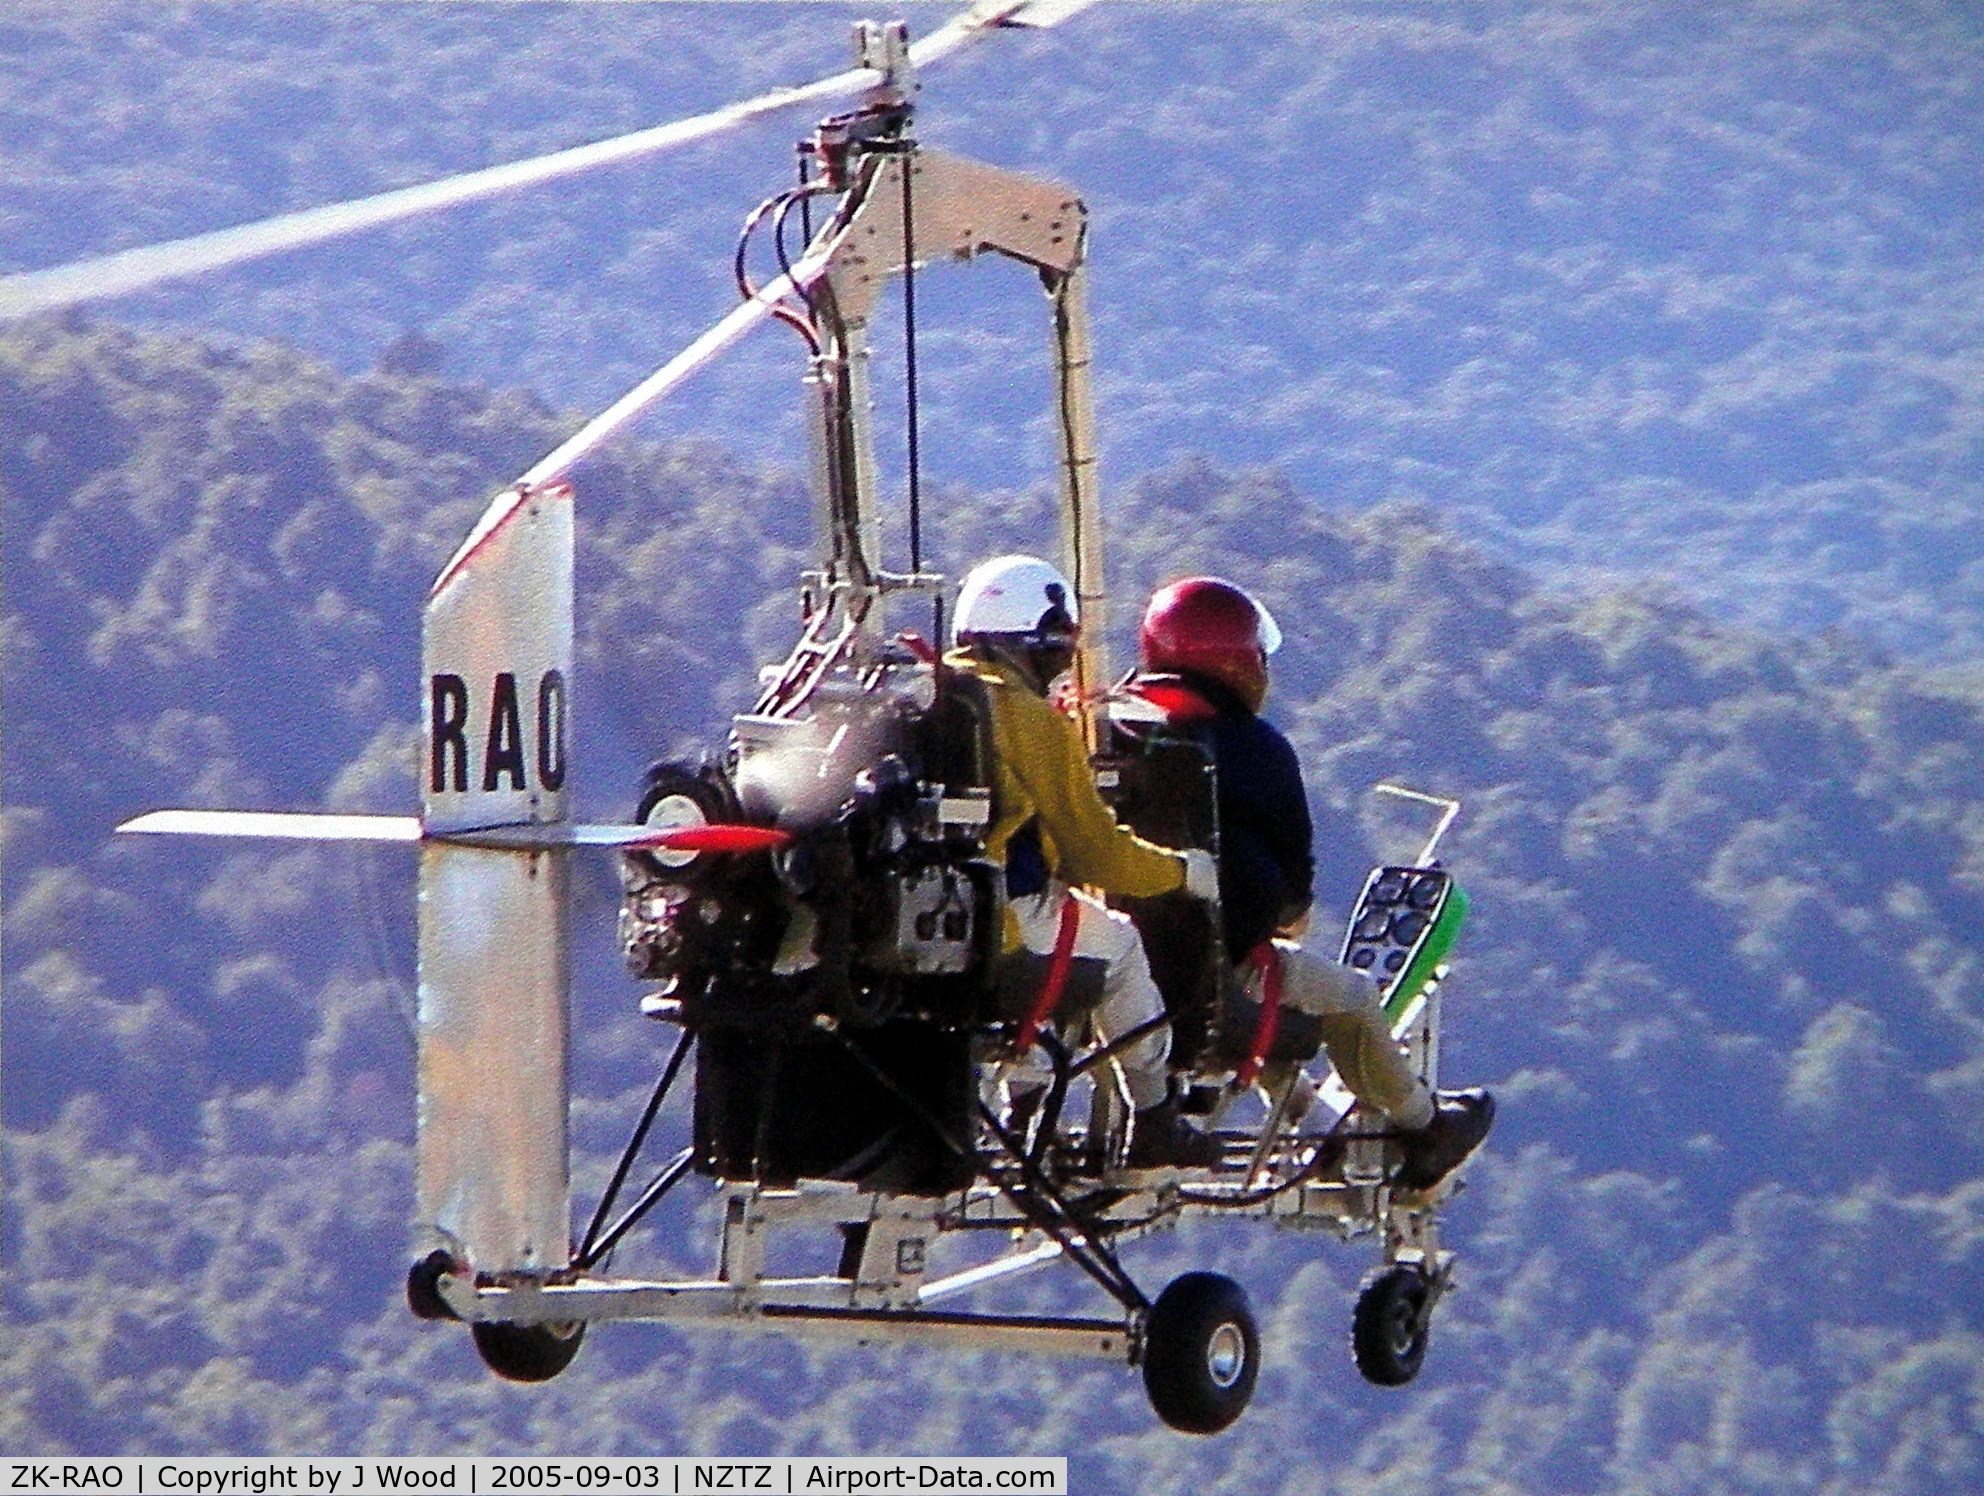 ZK-RAO, 2002 Parsons Tandem Trainer C/N 685, Colin Wood learning to fly his NZ-built Parsons Tandem gyrocopter, with legendary helicopter pilot Bill Black instructing from the rear seat.